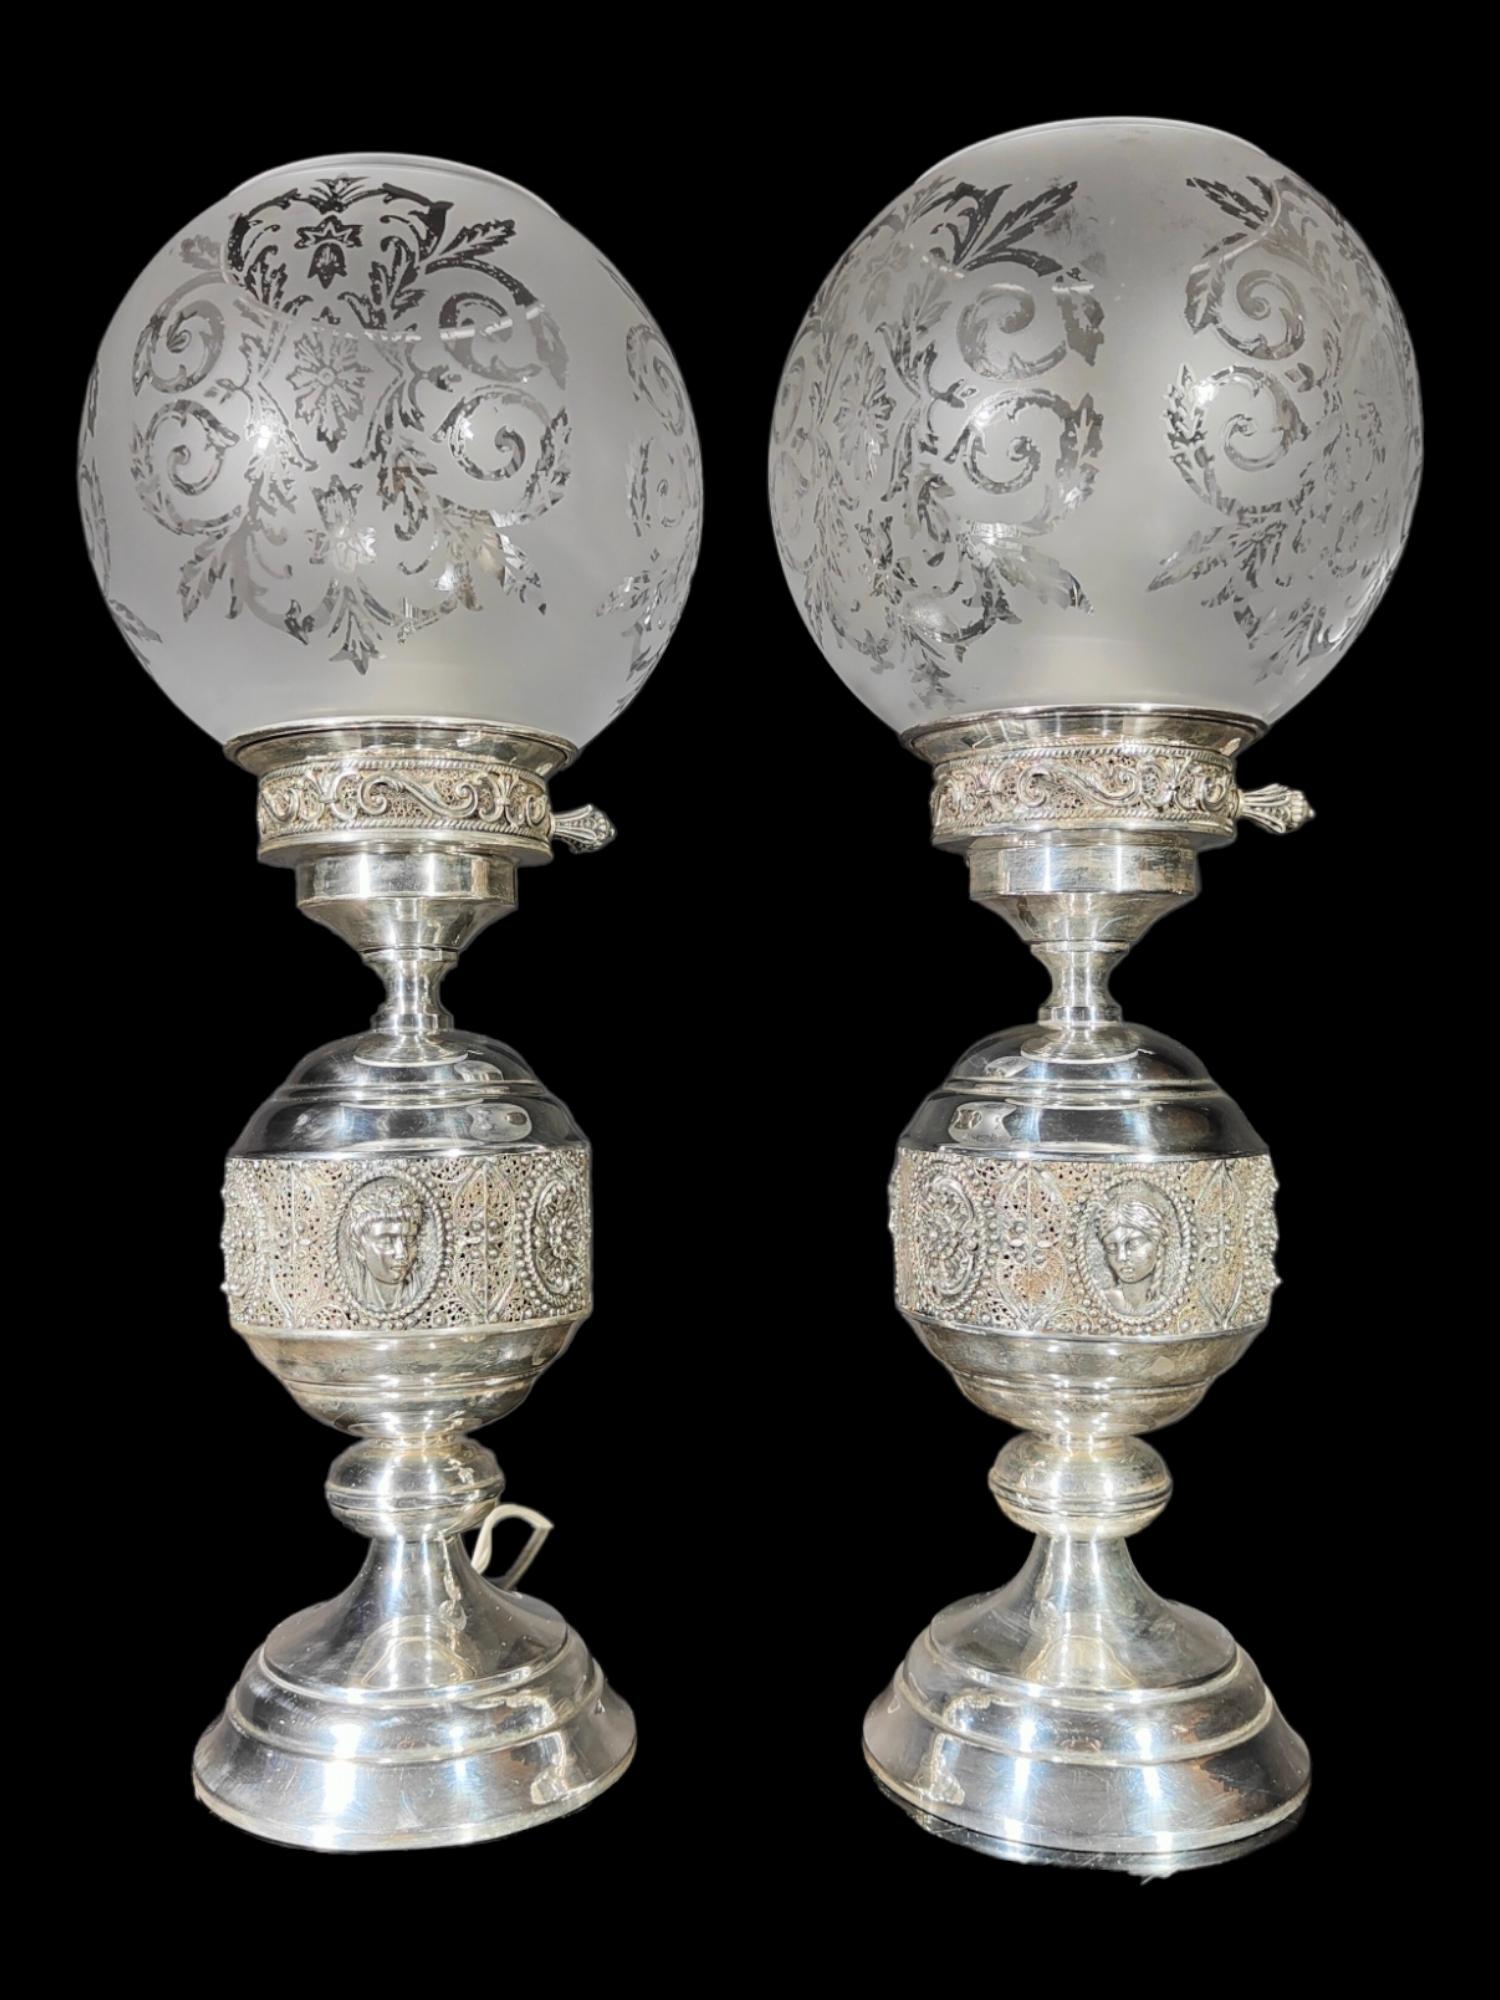 Pair of lamps in sterling silver with filigree
Elegant pair of solid silver lamps worked with filegree and cabochons of classic roman busts. One of the lamps has the glass globe damaged. See photos-it can be replaced by others of your choice but we